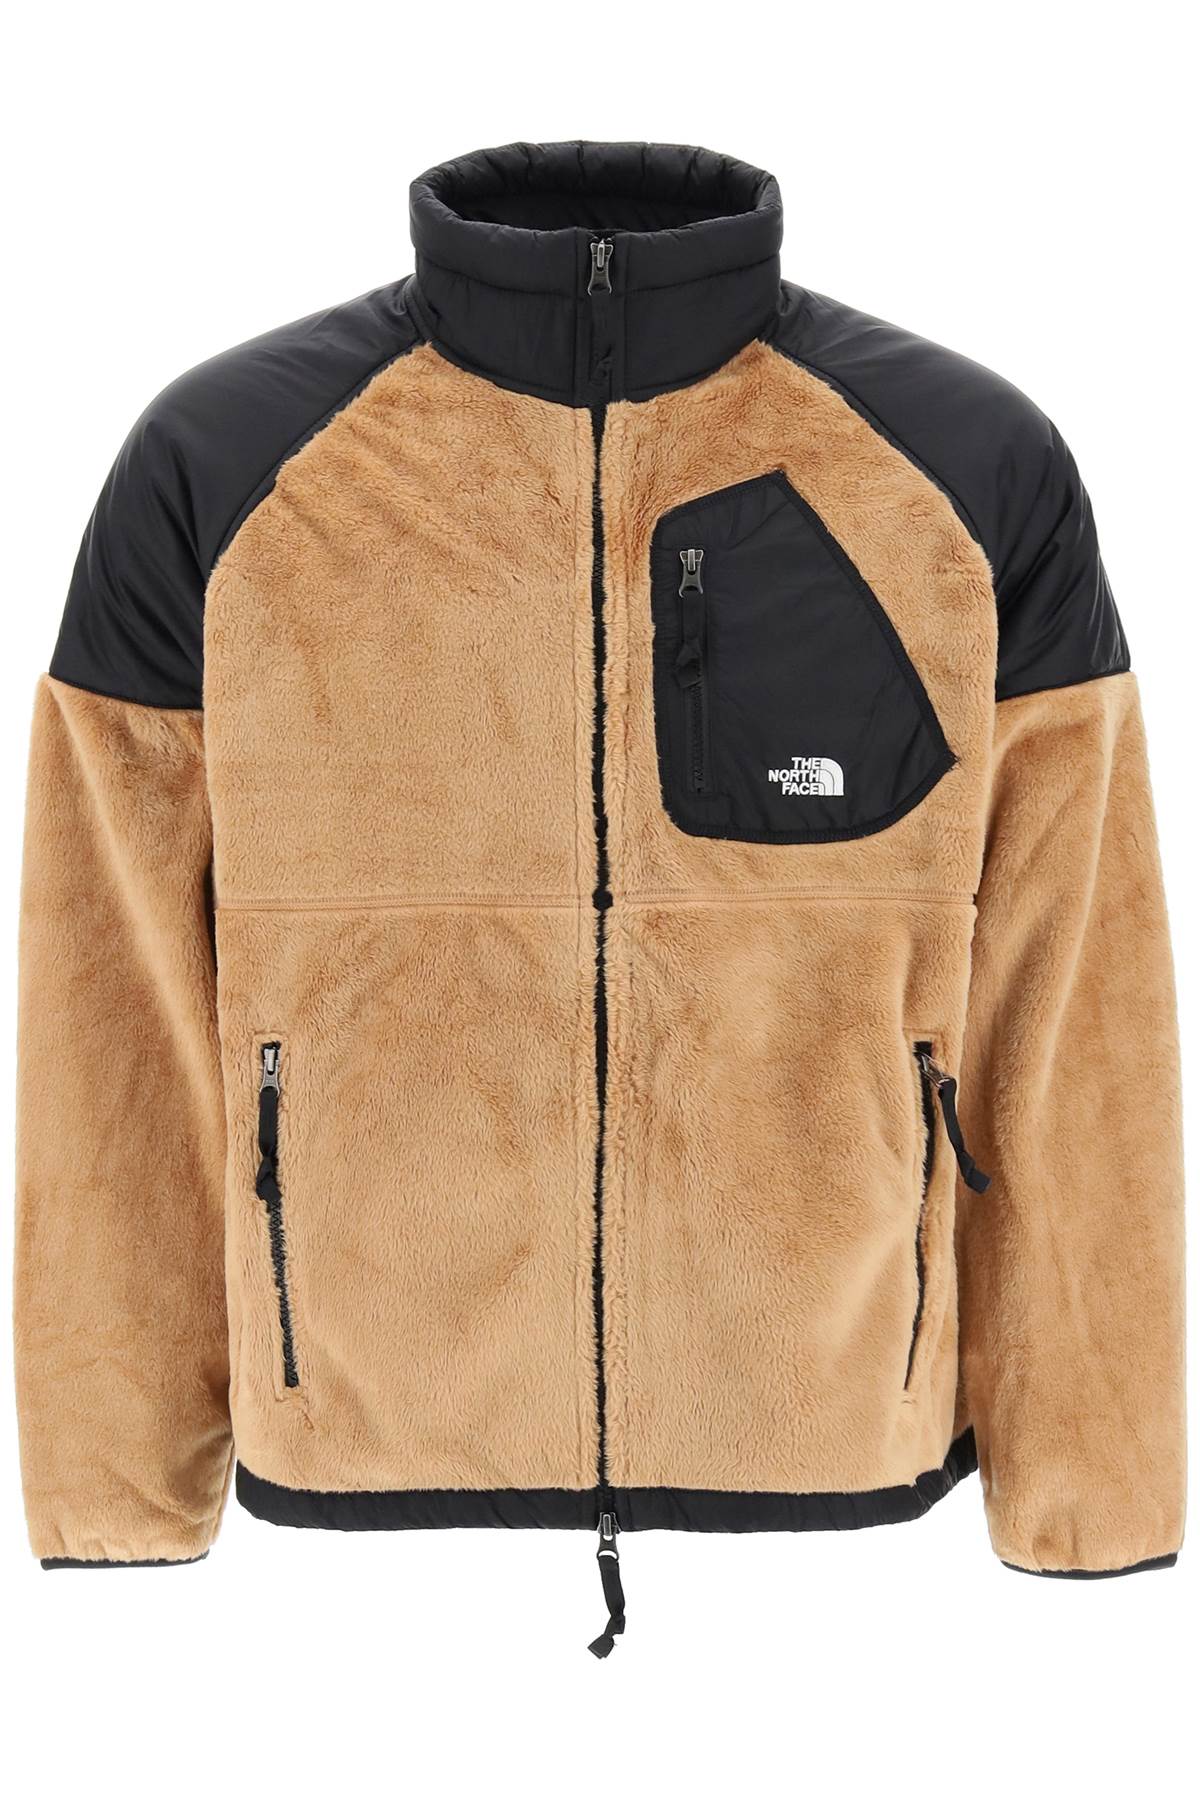 Shop The North Face Fleece Jacket With Nylon Inserts In Almond Buttertnf Black (beige)